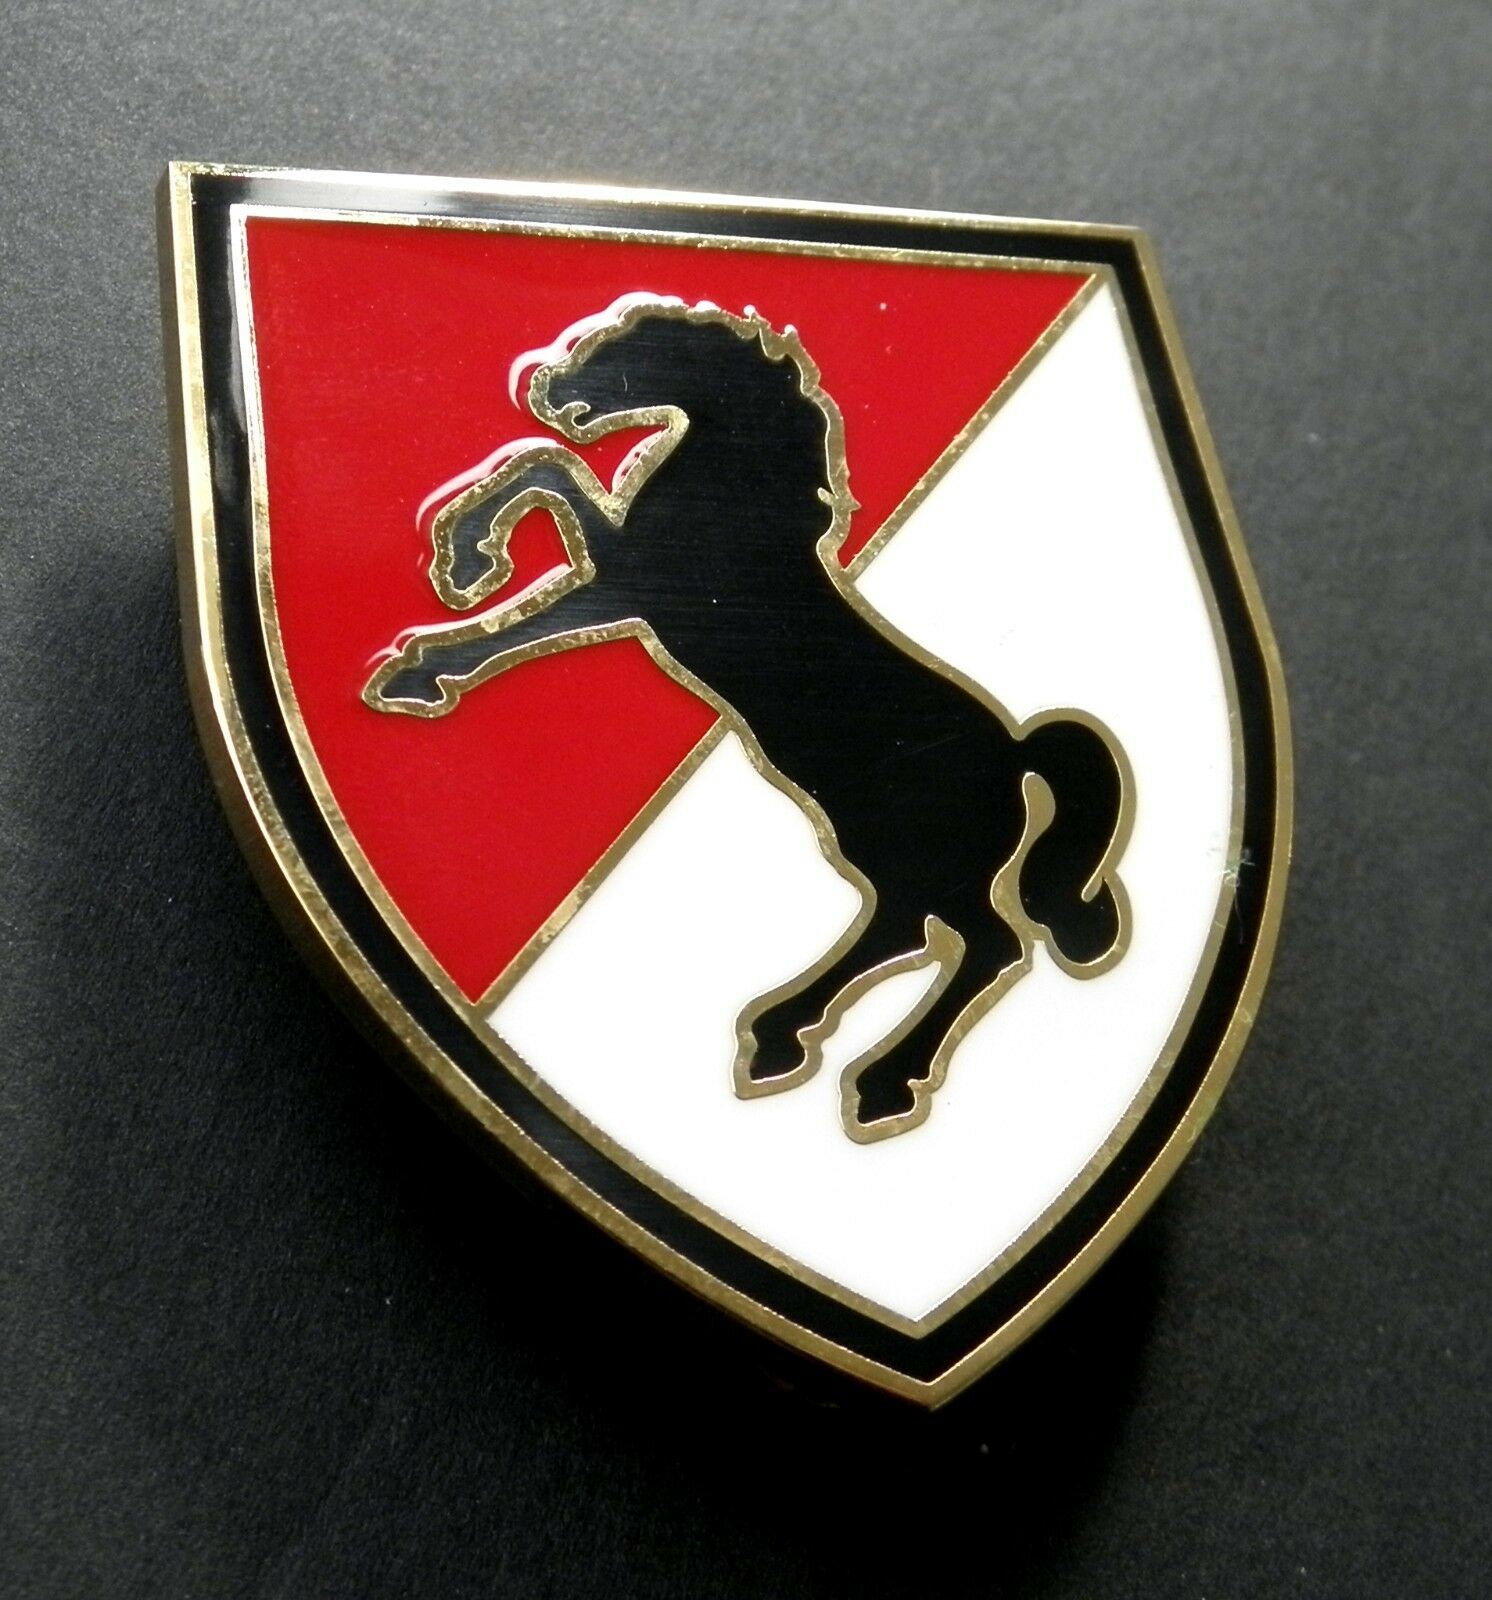 US Army 11th Cavalry Division Combat Service Badge 1.5 x 2 inches High Quality - $11.95